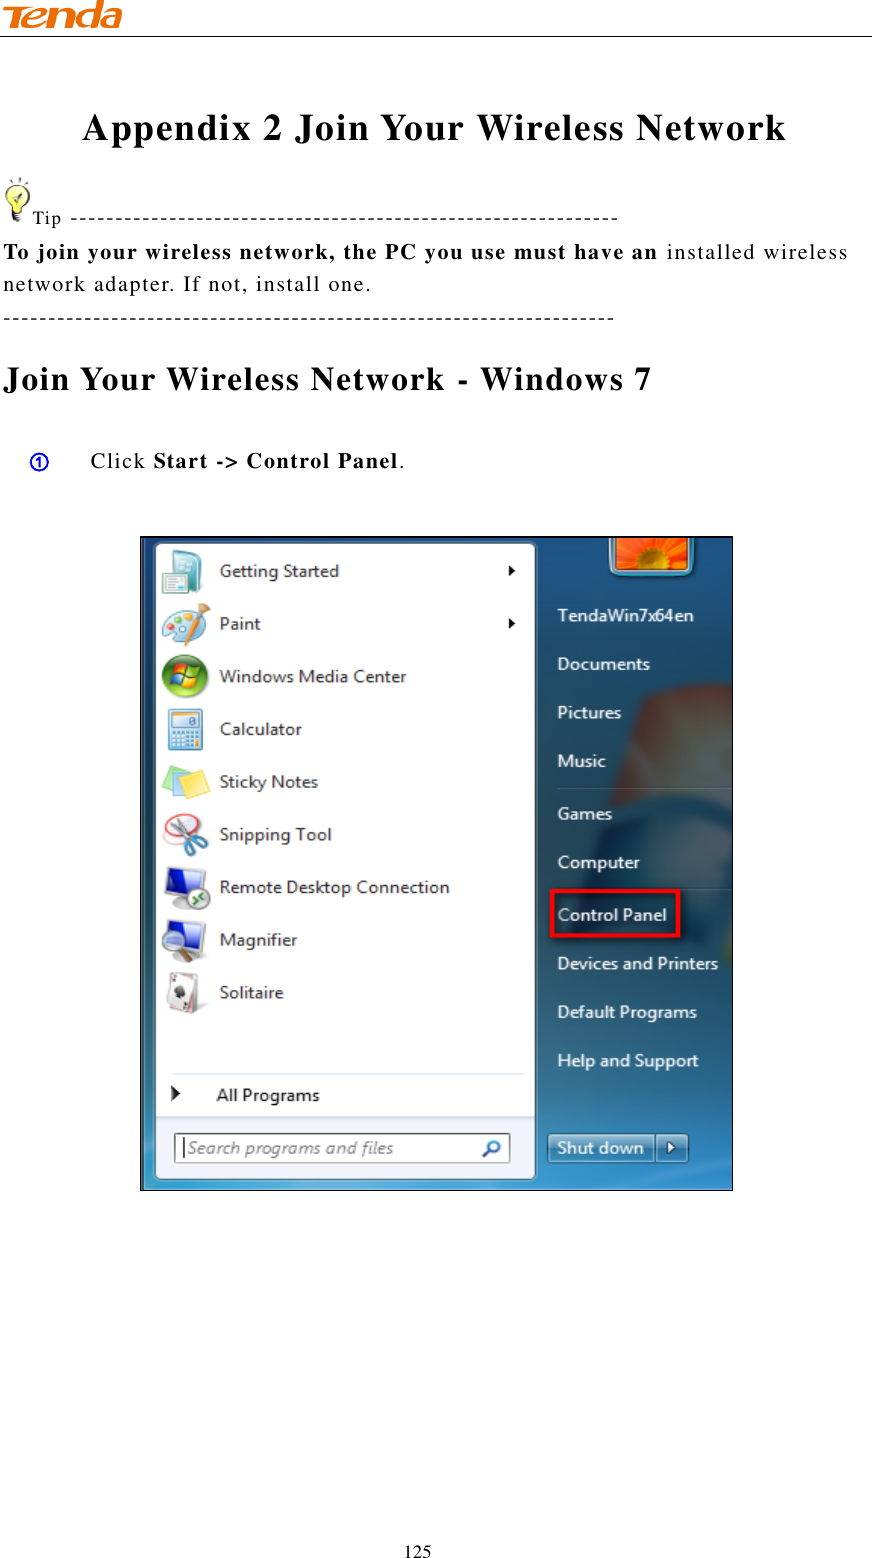                                    125 Appendix 2 Join Your Wireless Network Tip ------------------------------------------------------------- To join your wireless network, the PC you use must have an installed wireless network adapter. If not, install one. -------------------------------------------------------------------- Join Your Wireless Network - Windows 7 ① Click Start -&gt; Control Panel.   